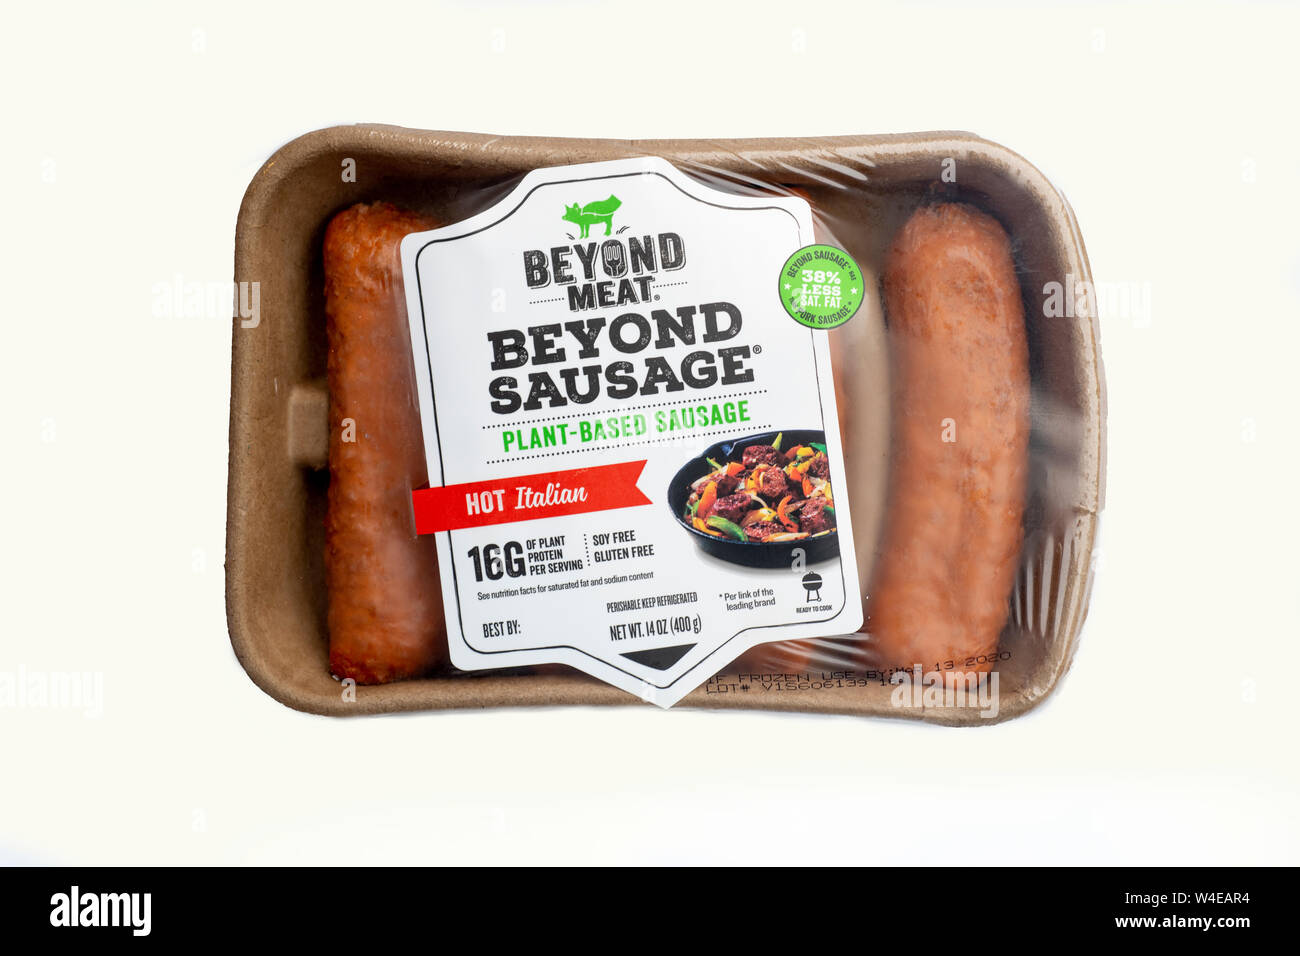 Beyond Meat plant based meatless food products for vegan and vegetarian eating spicy sausages Stock Photo